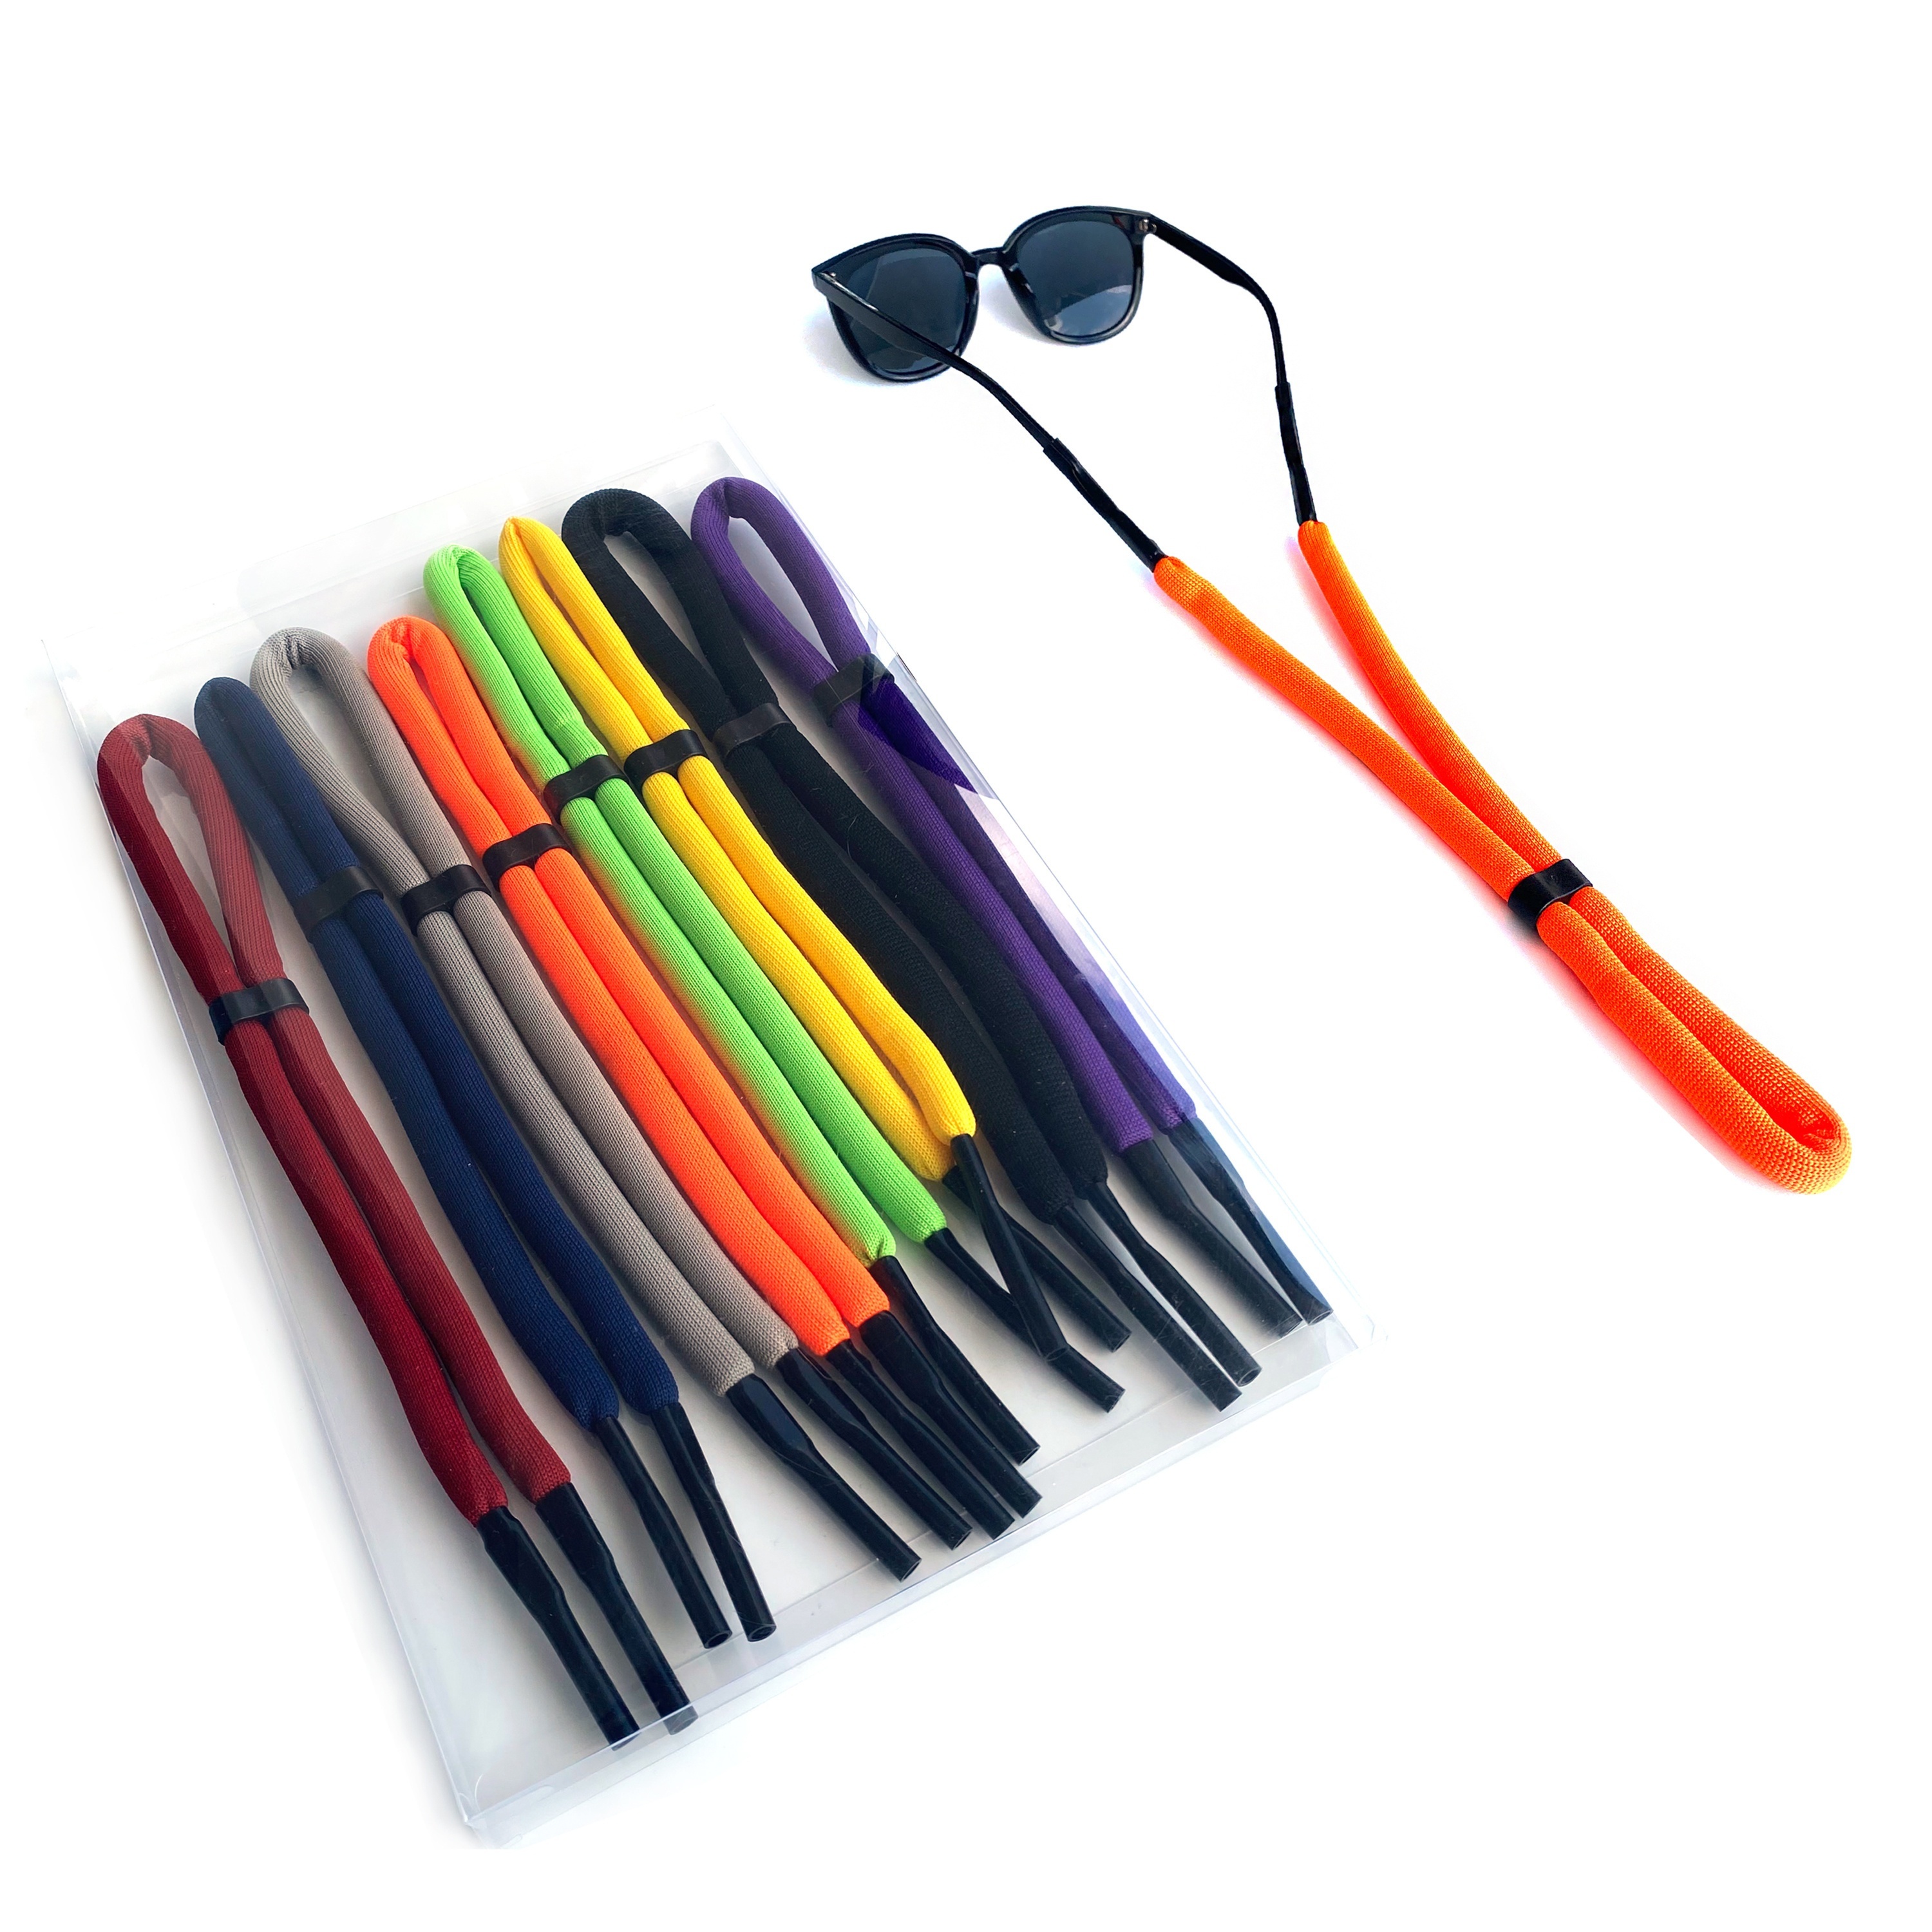 

8 Pcs Floating Sunglass Strap Pack Glasses Float Safety Outdoor Eyeglass Rope For Surfing Sailboat Swimming